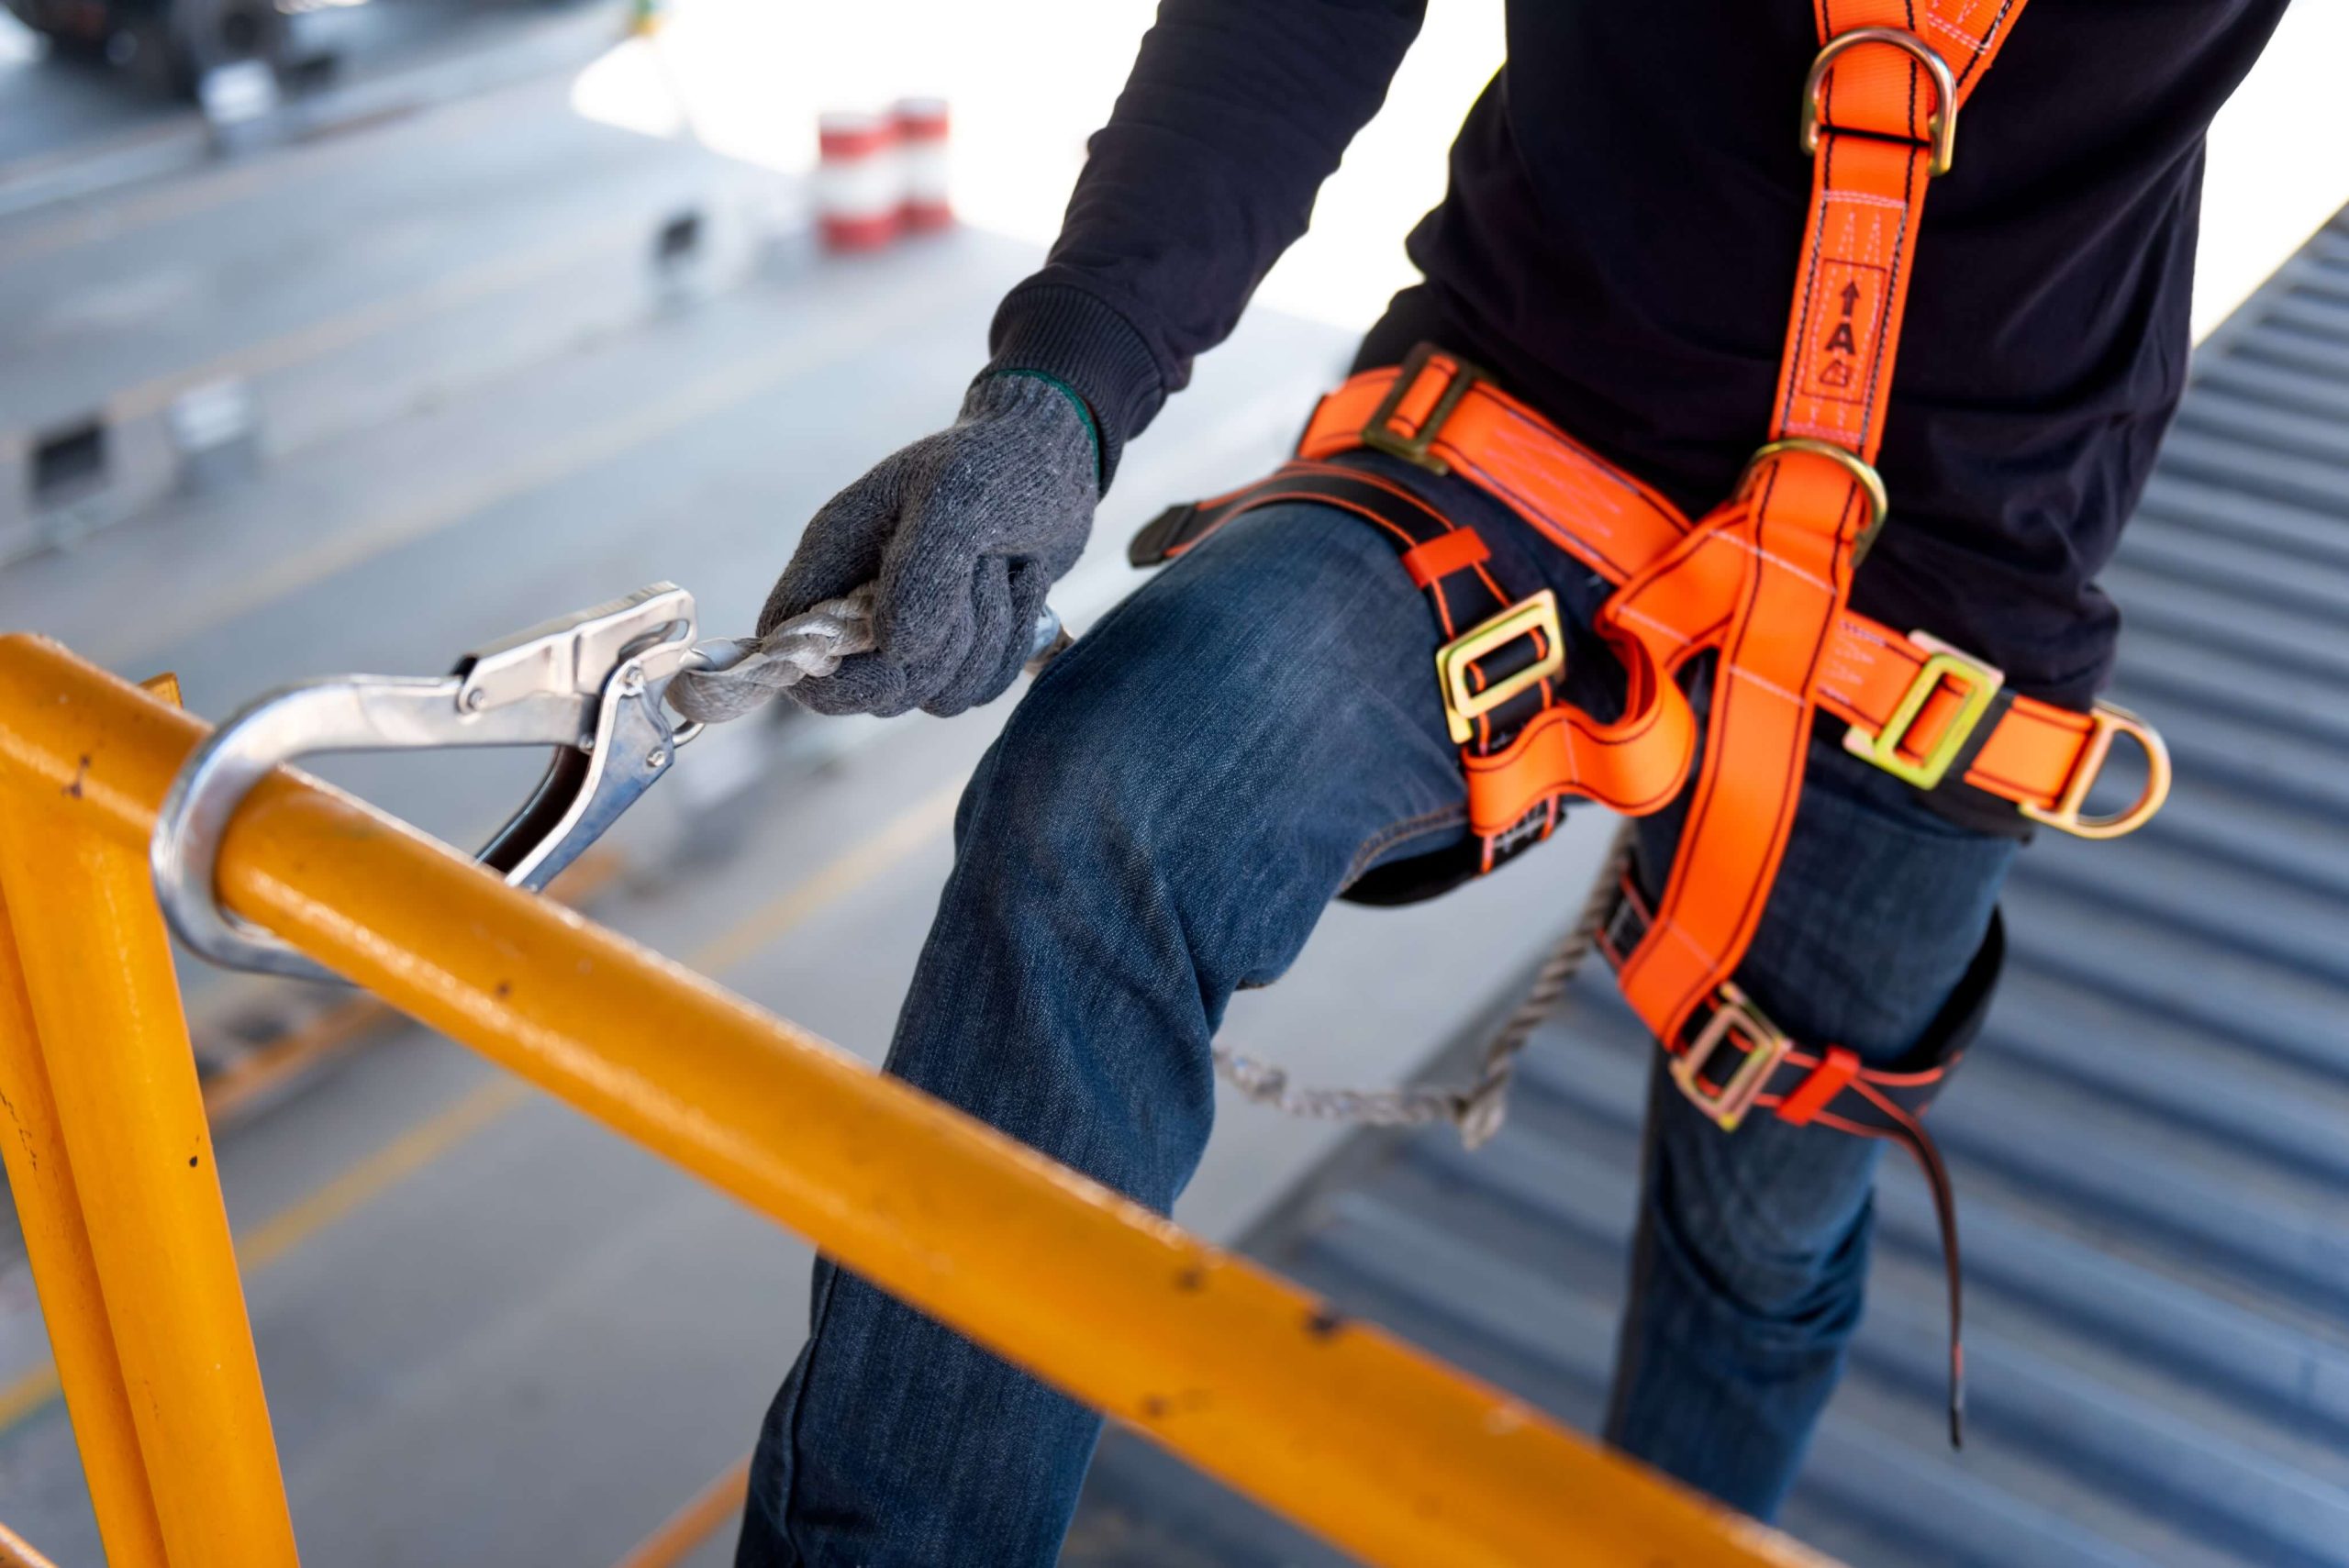 fall protection equipment inspection and cleaning